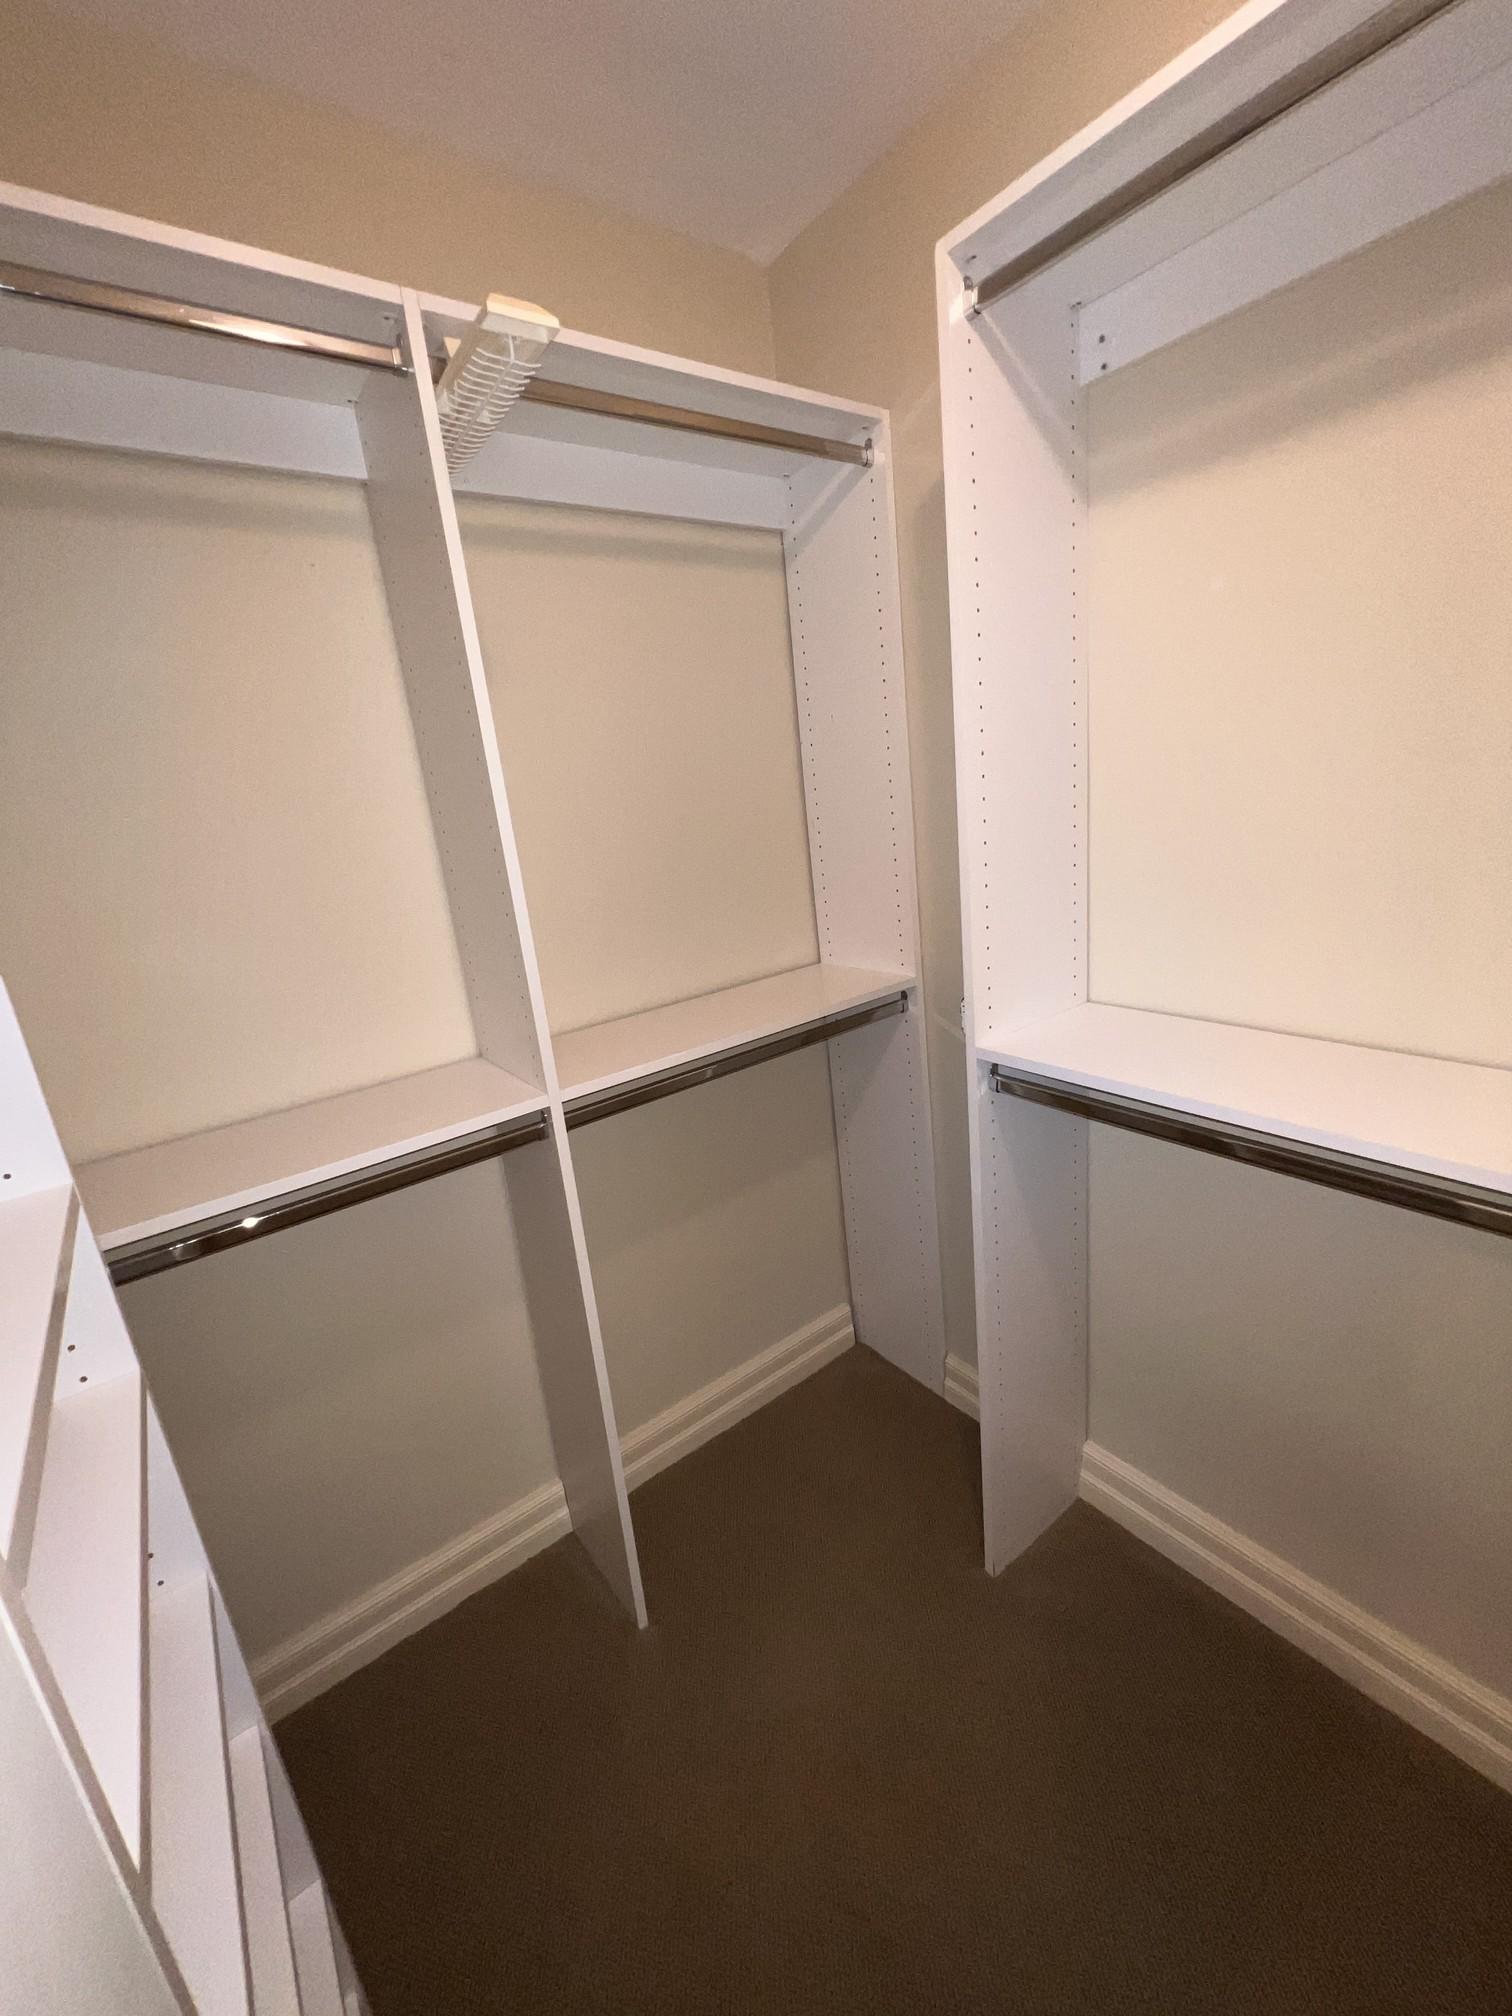 Master Bedroom Closet System with Full Size Dressing Mirror, with Double Shoe Racks 132" X 70"